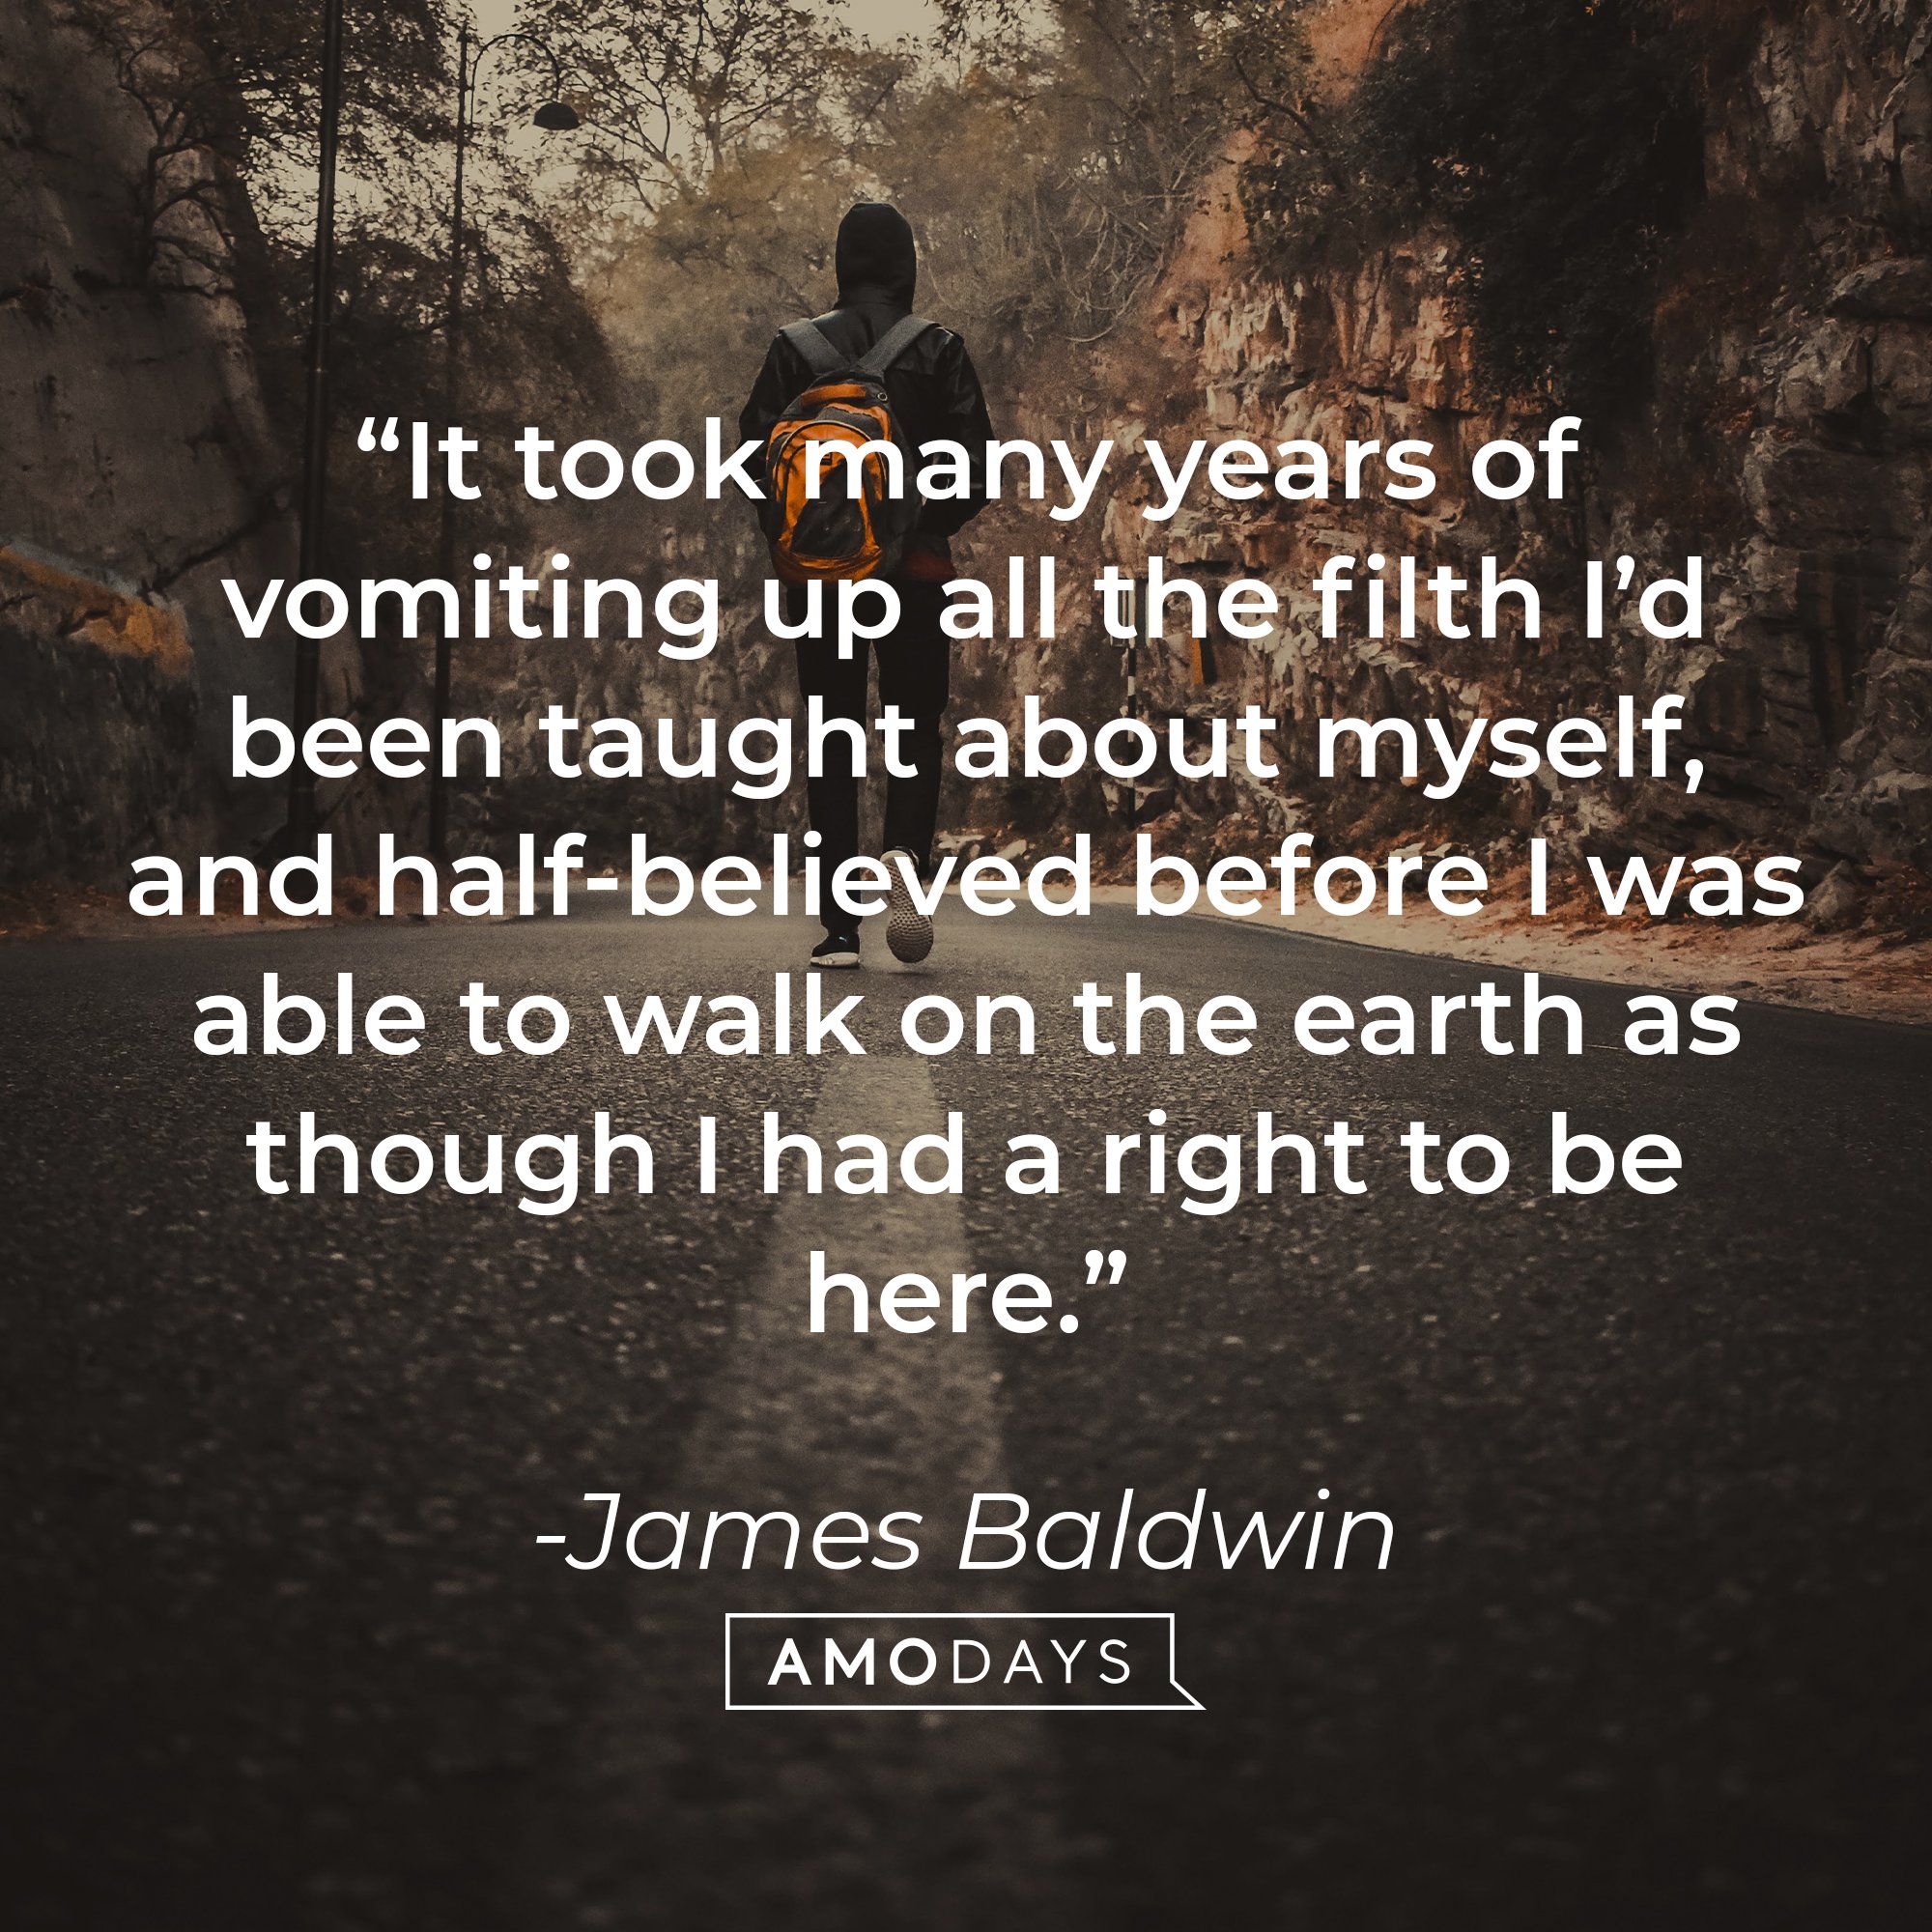 James Baldwin's quote: “It took many years of vomiting up all the filth I’d been taught about myself, and half-believed before I was able to walk on the earth as though I had a right to be here.” | Image: AmoDays